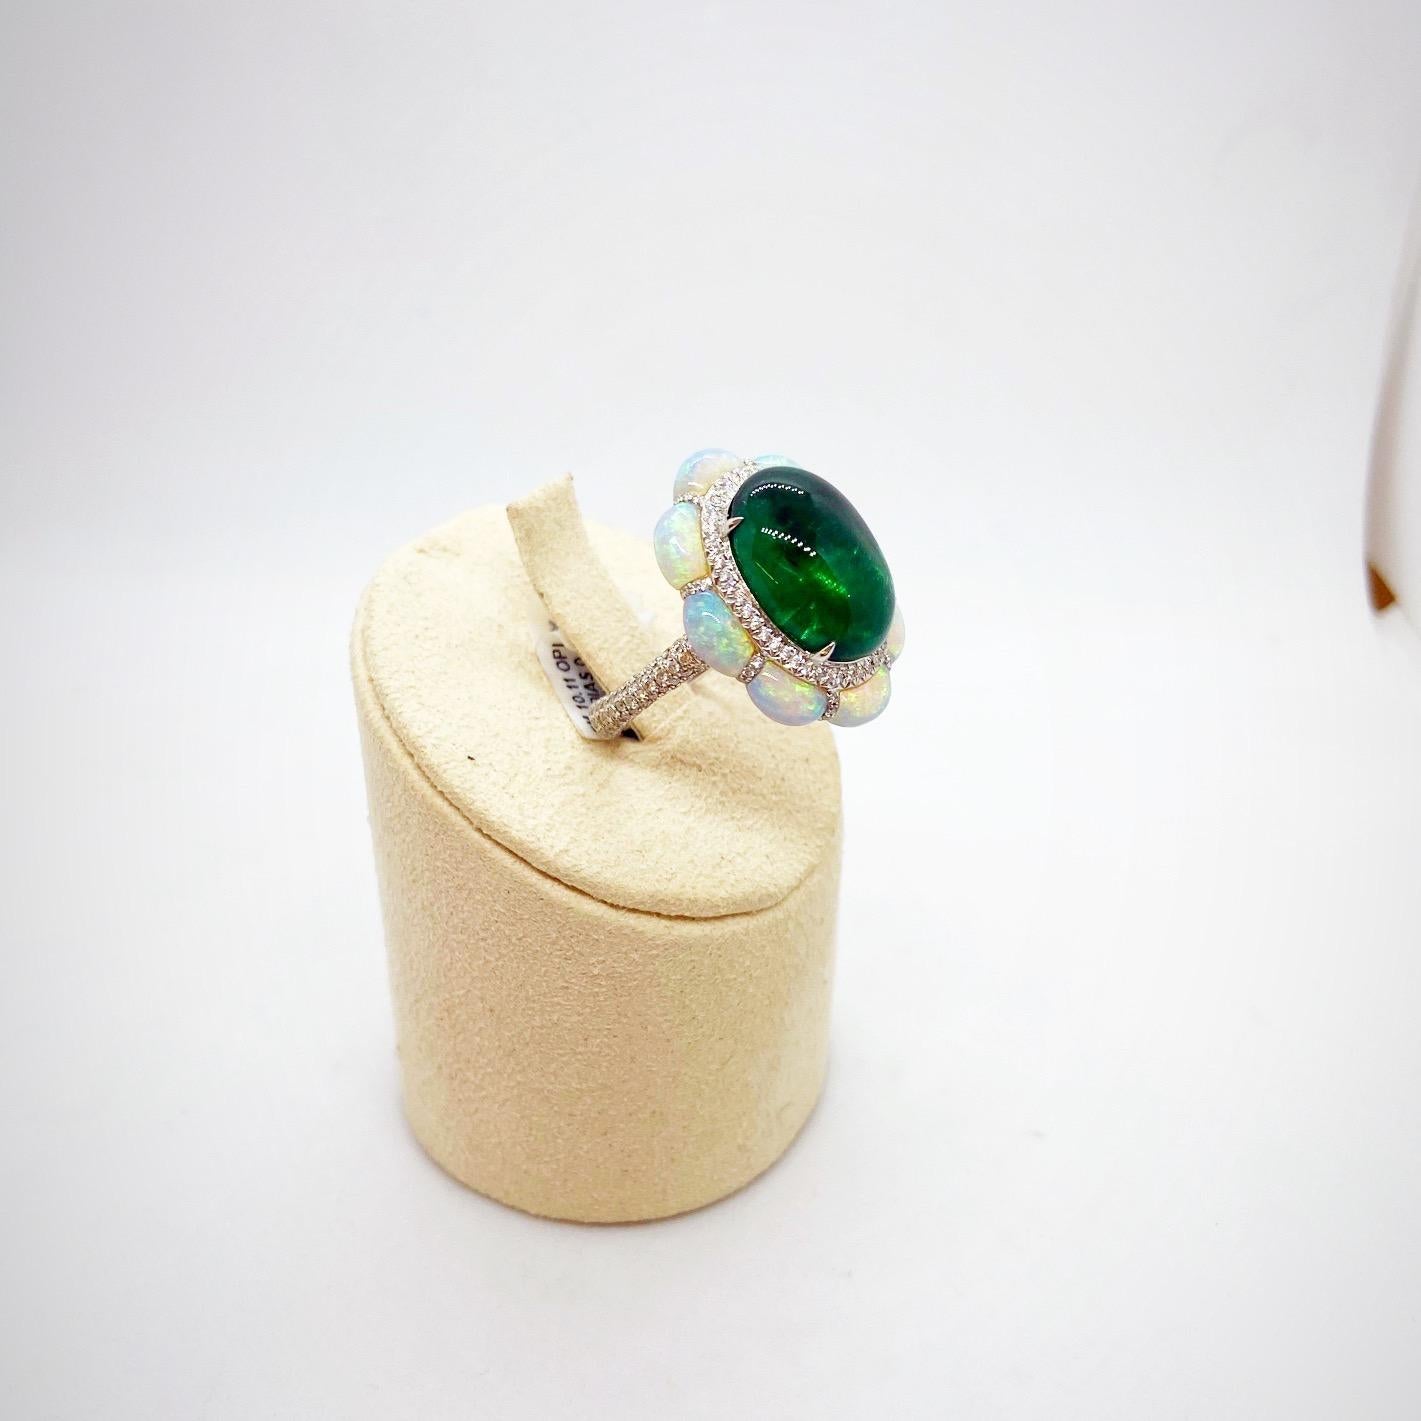 Modern Arunashi 18KT White Gold, 10.11Ct. Cabochon Emerald Ring with Opals & Diamonds For Sale